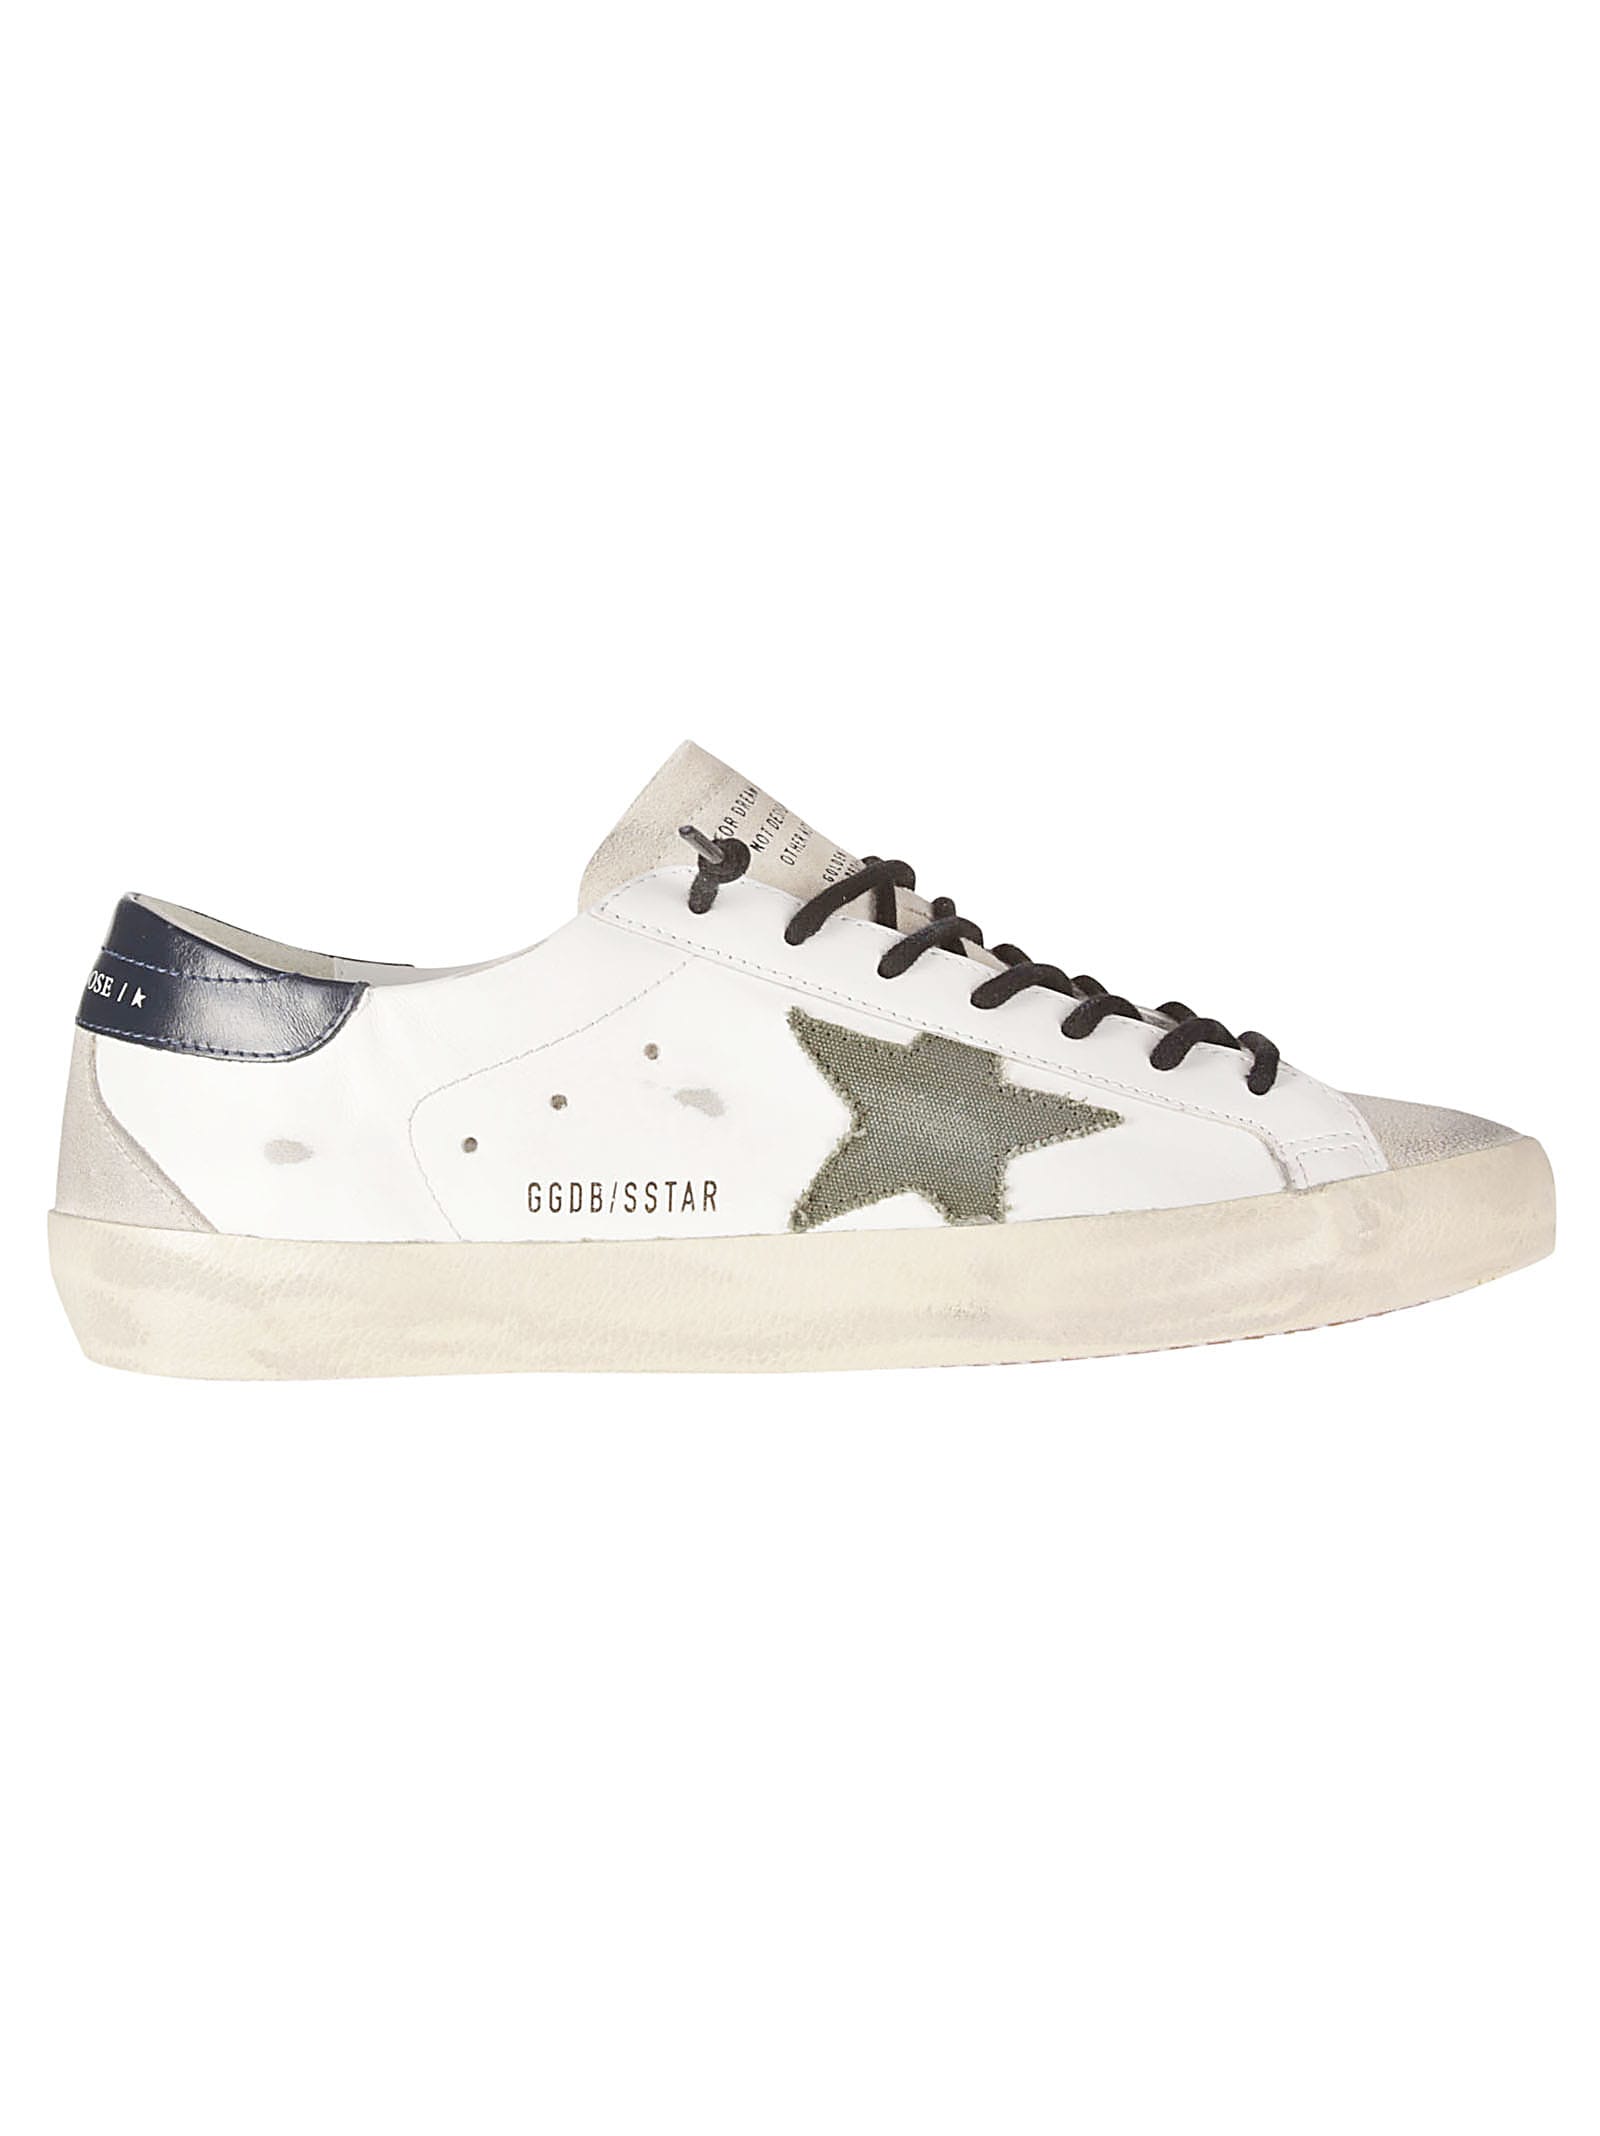 GOLDEN GOOSE GOLDEN GOOSE SUPER-STAR CLASSIC WITH SPUR SNEAKERS